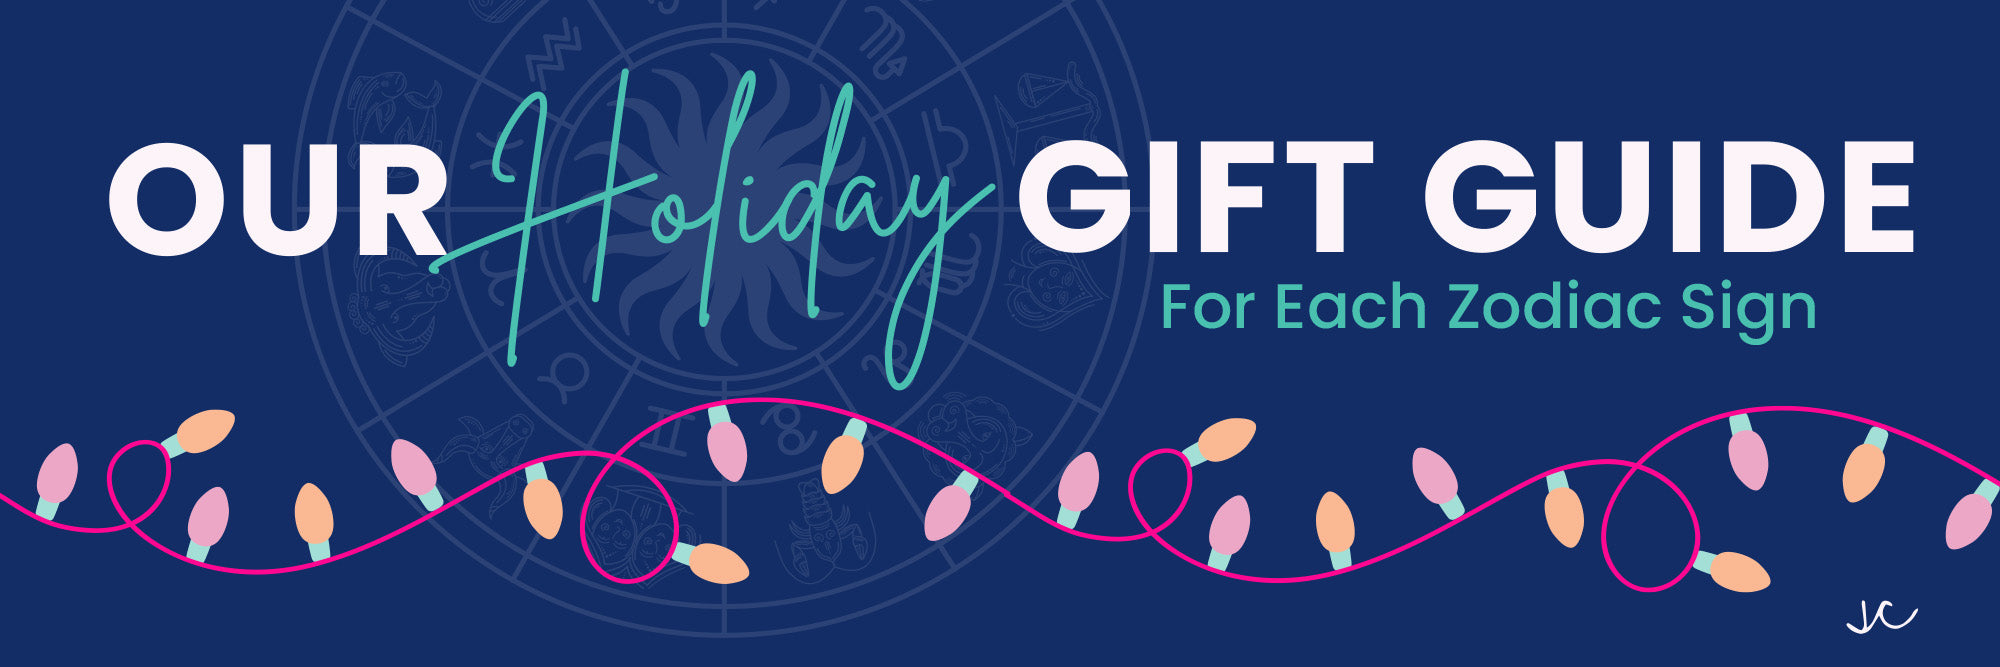 Zodiac Holiday Gift Guide - Boob Gifts - Titty City Design